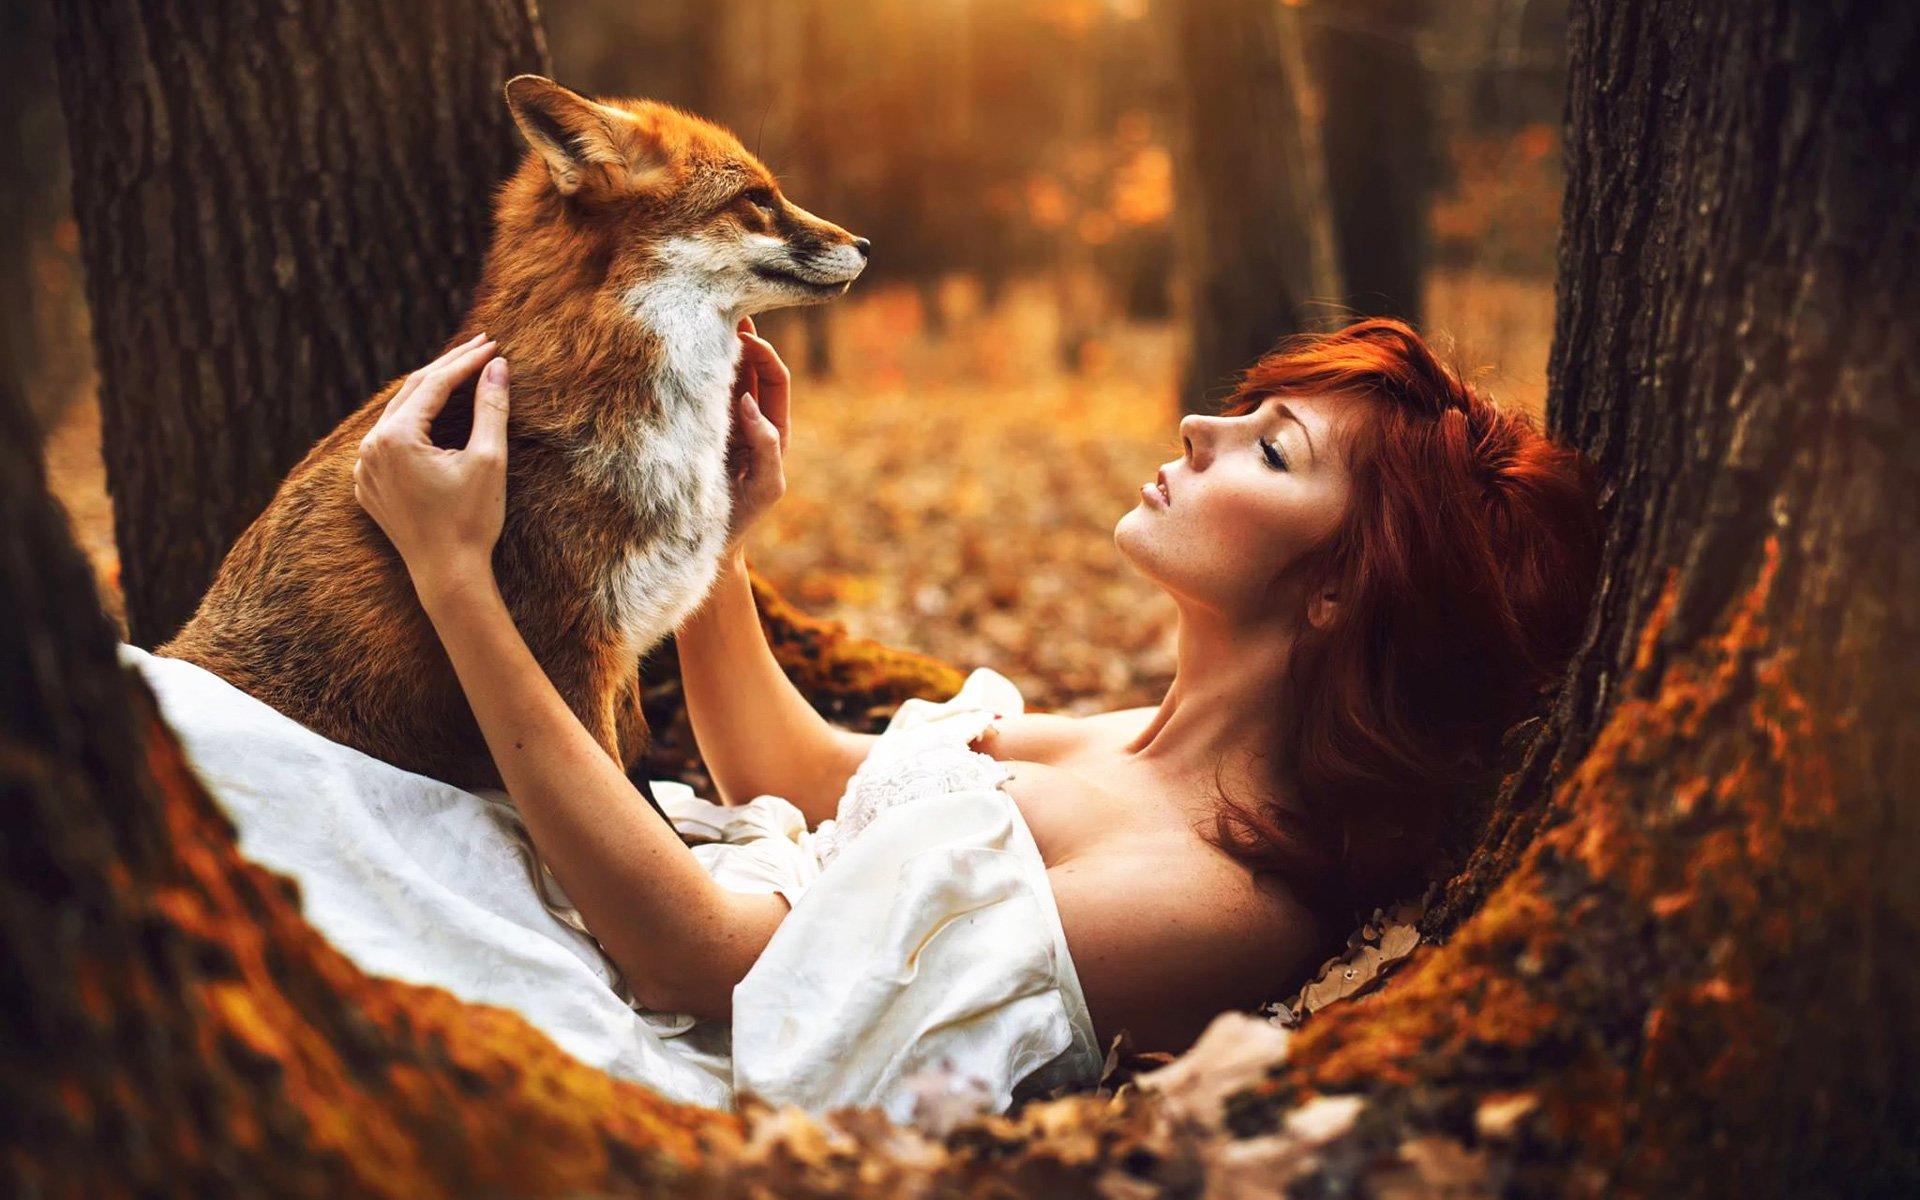 Red Haired Woman With A Red Fox In Autumn Forest HD Wallpaper